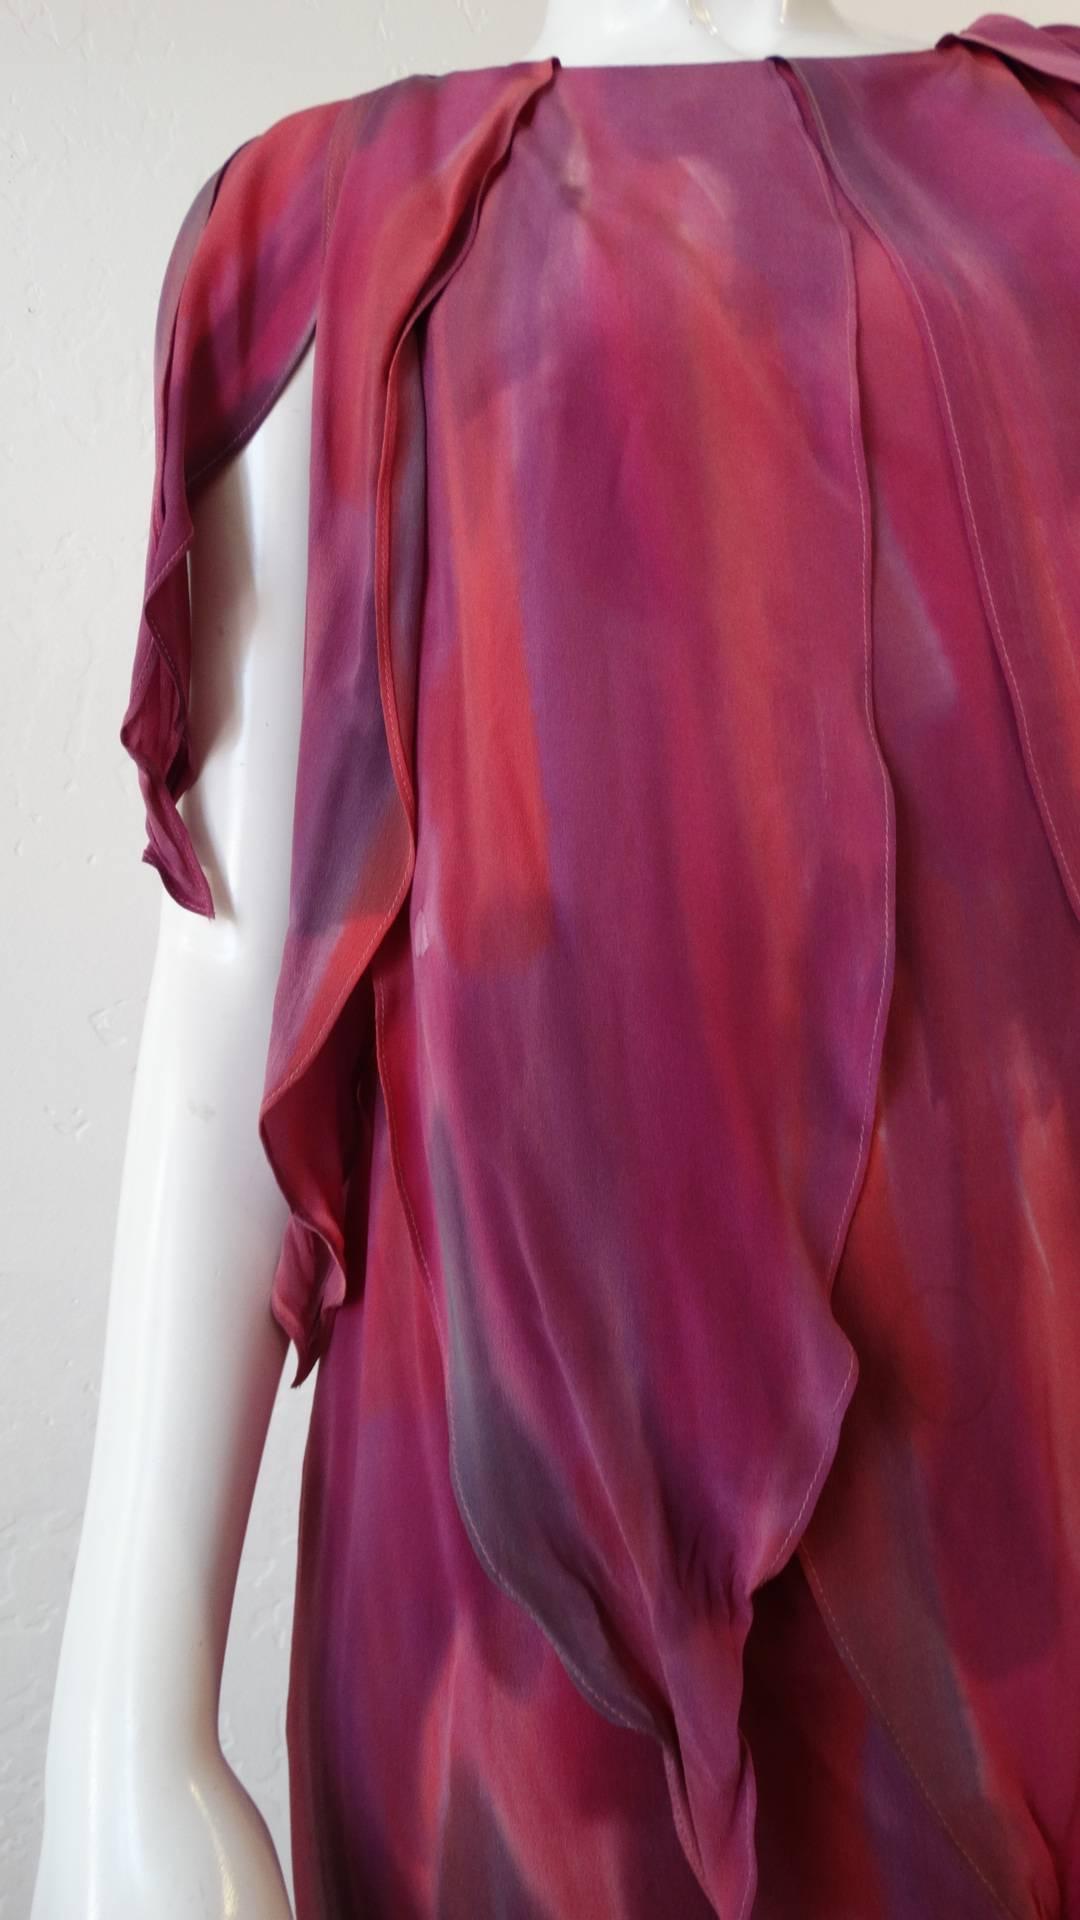 1980s Chiffon Watercolor Ruffle Petal Dress In Excellent Condition For Sale In Scottsdale, AZ